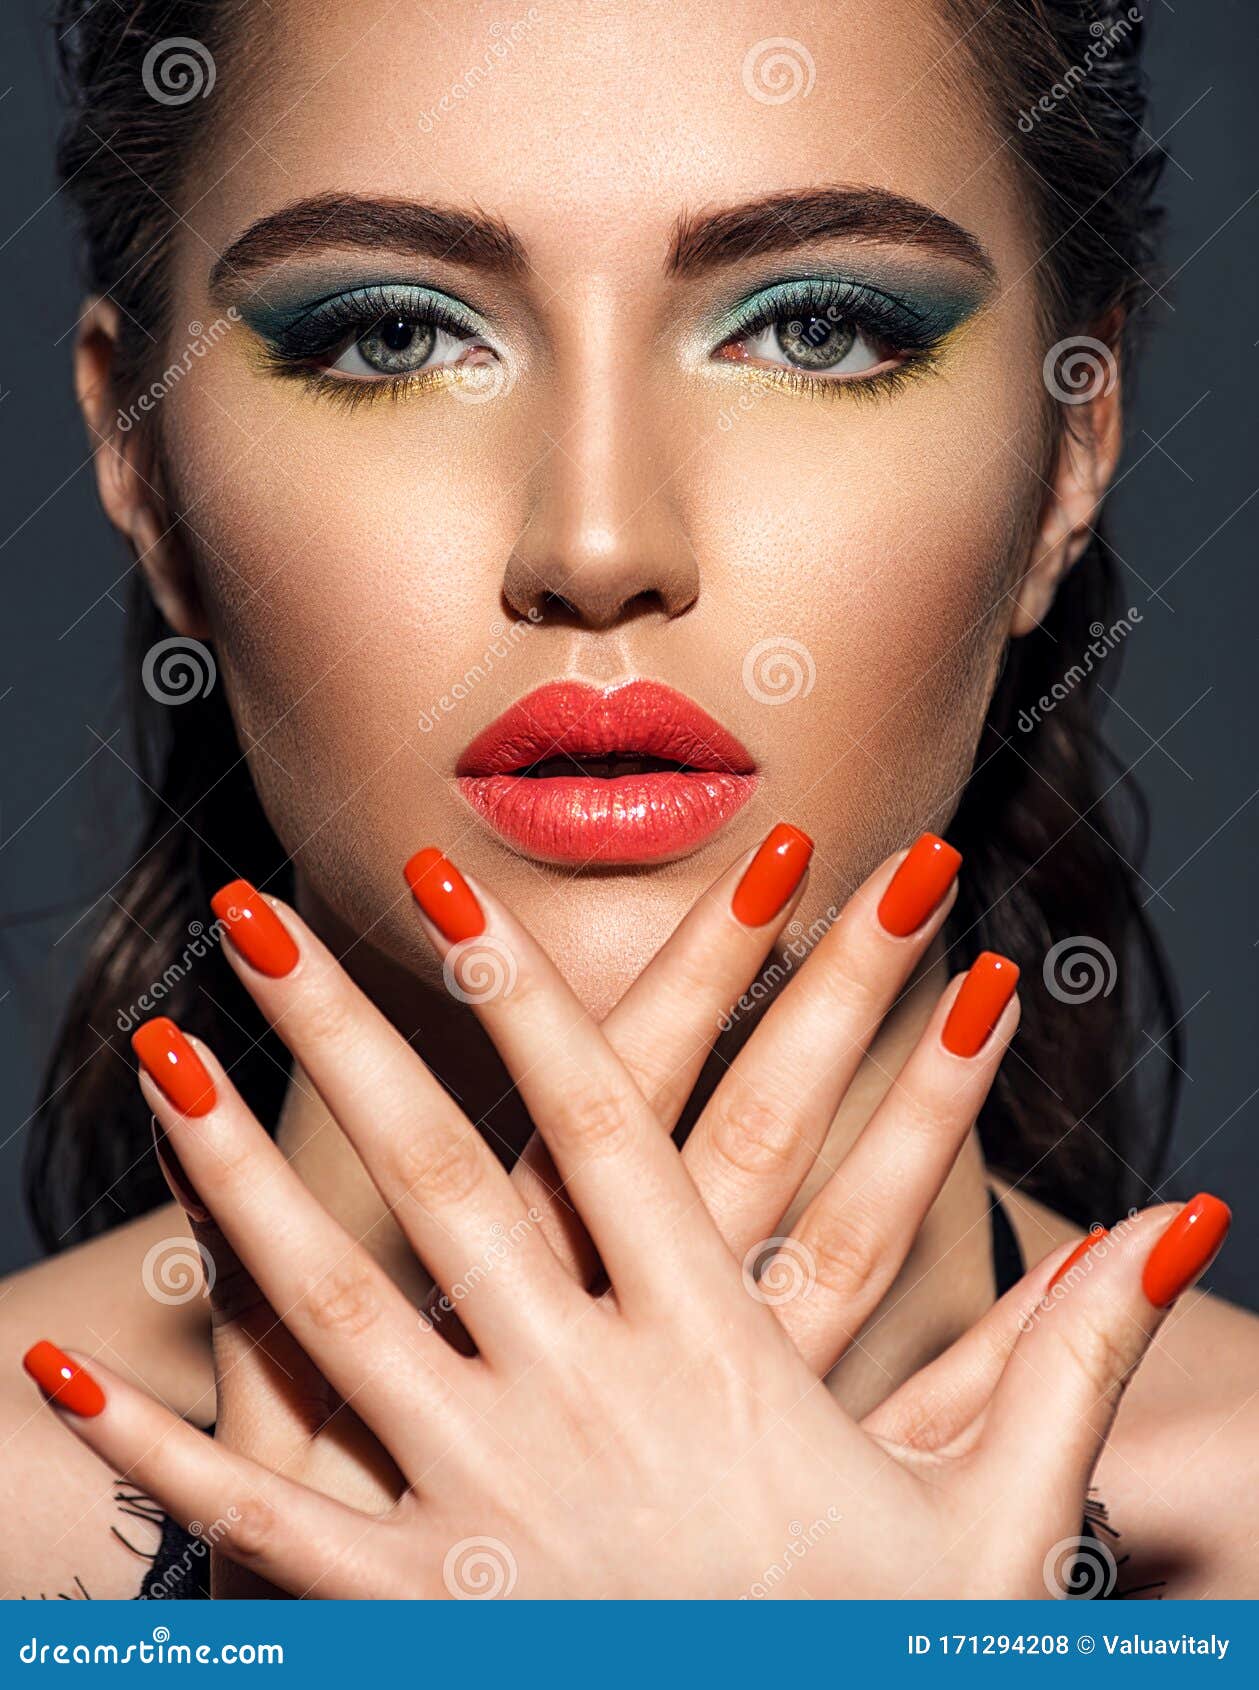 Beautiful Woman With Bright Red Lipstick And Nails